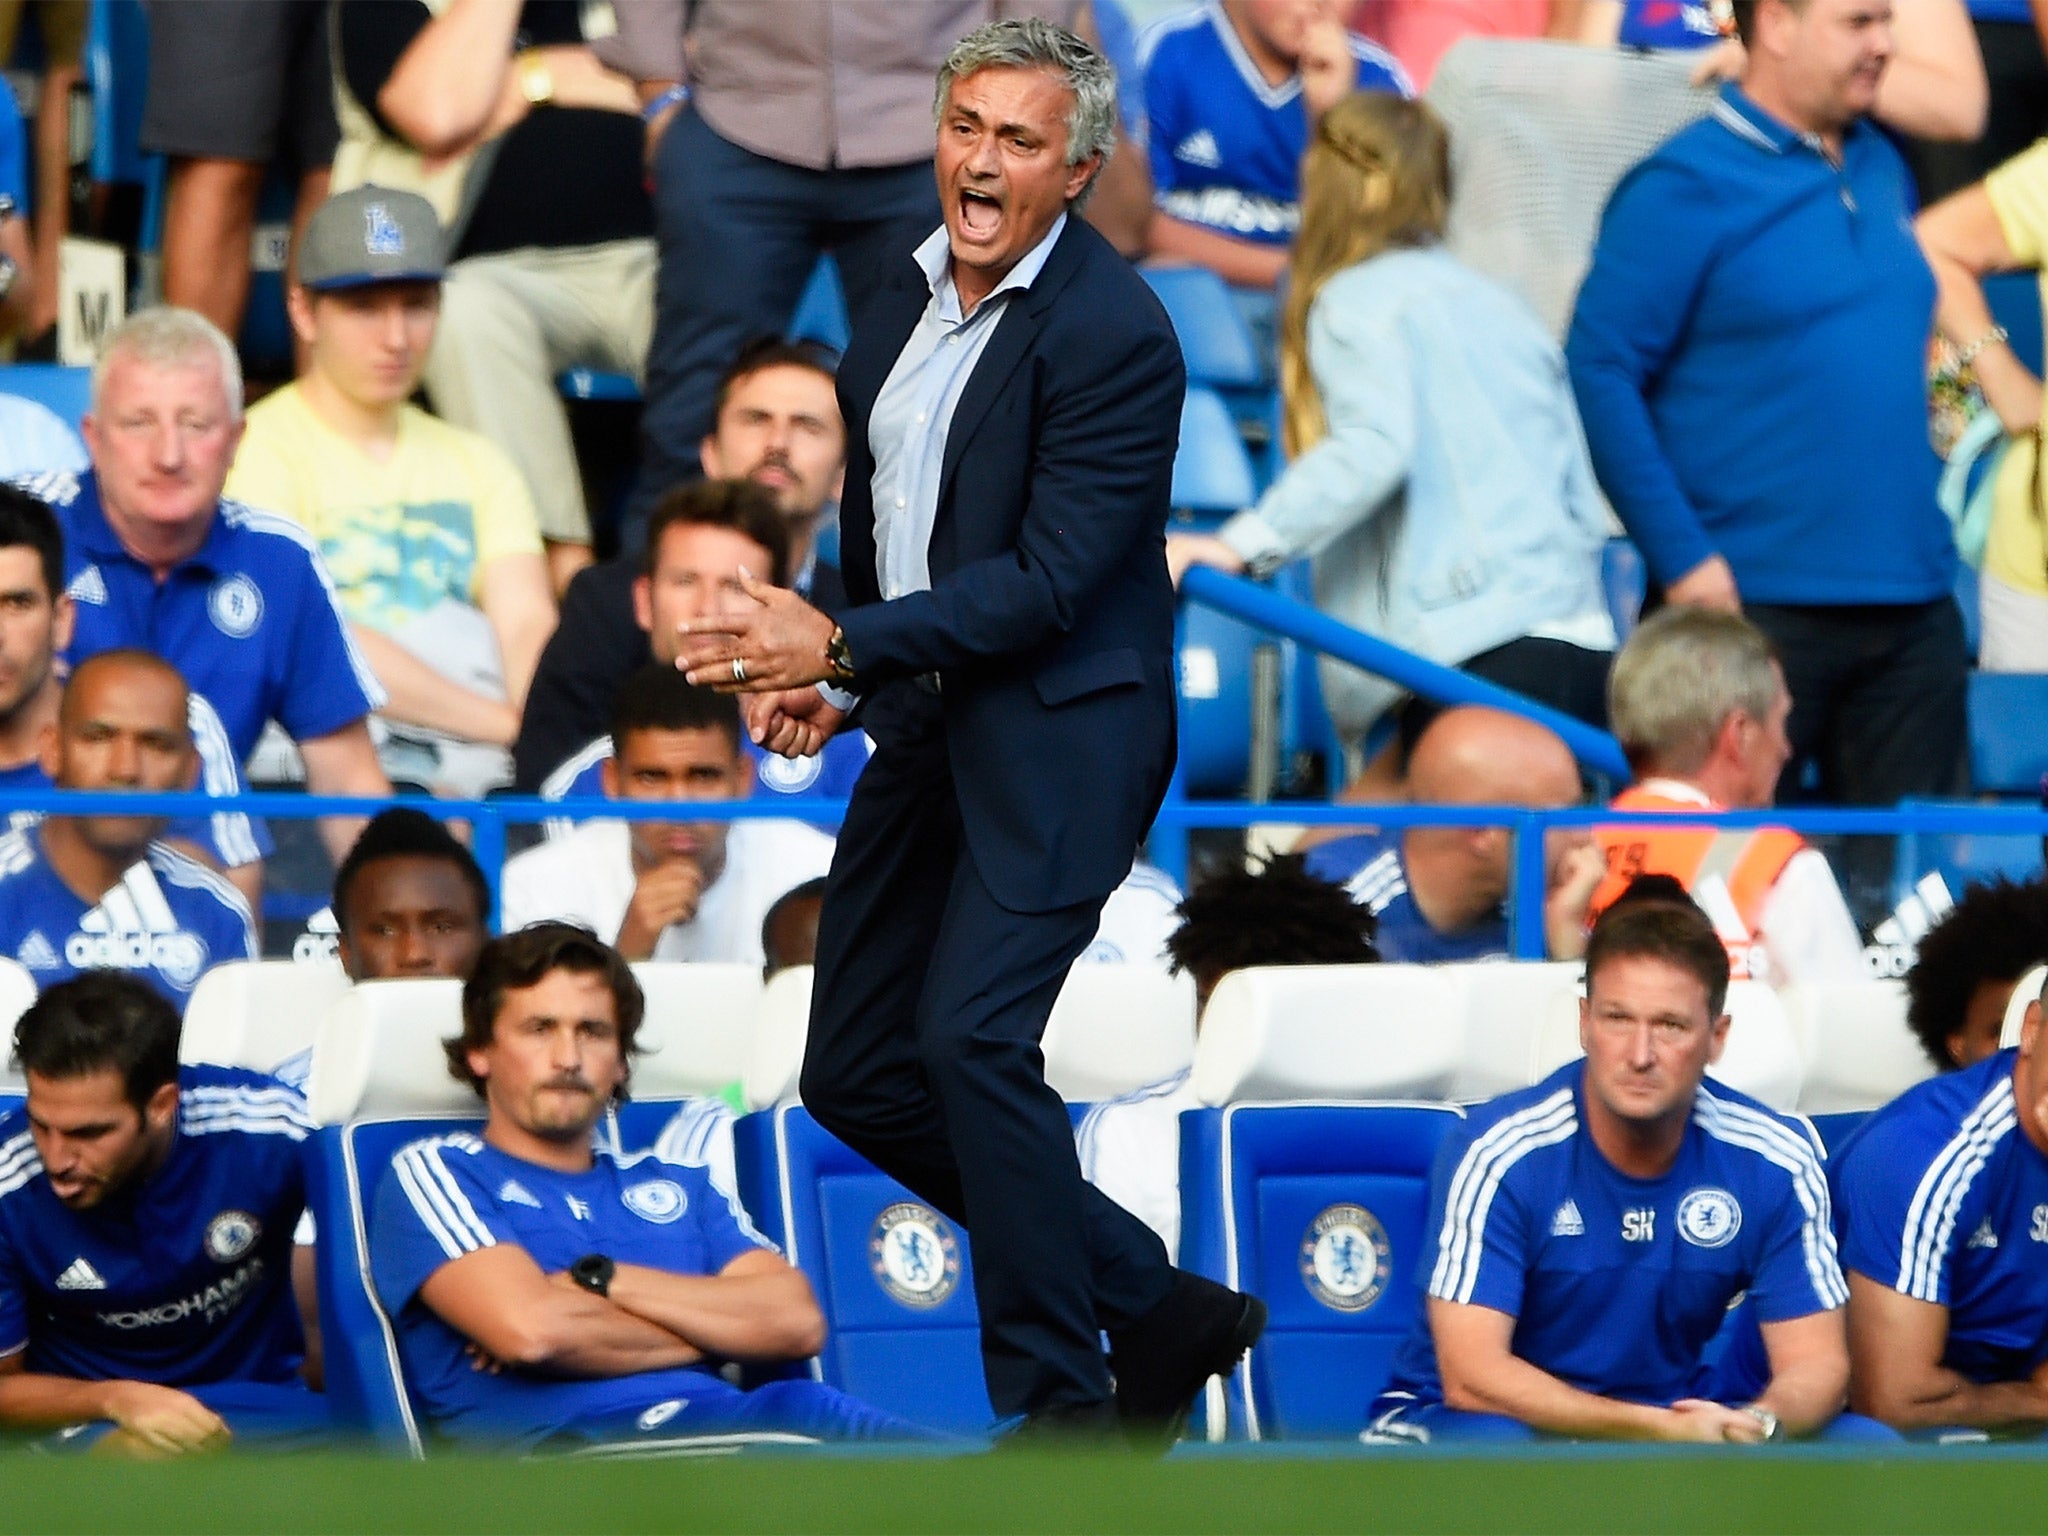 Jose Mourinho lost his cool as the Chelsea medical team ran on the pitch to attend to Hazard (Getty)